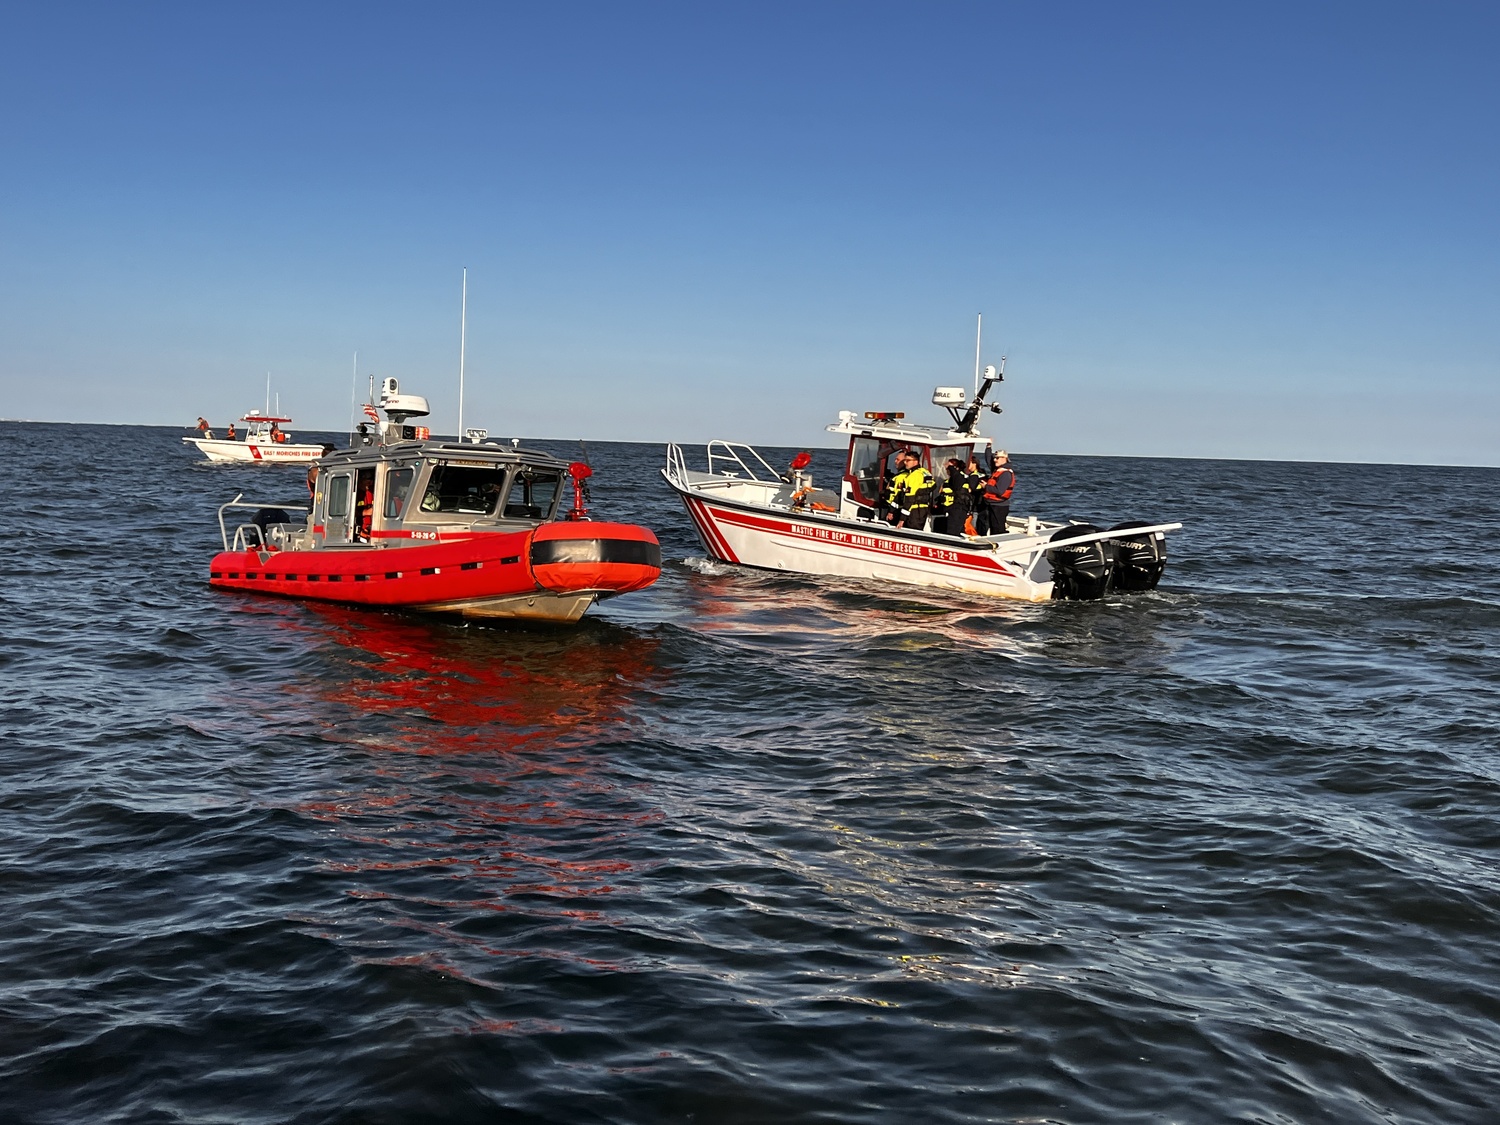 Six local fire departments formed a coordinated marine rescue team to respond to emergencies on and around Moriches Bay to fill the gap left by the loss of US Coast Guard crews in the bay due to staffing shortages.